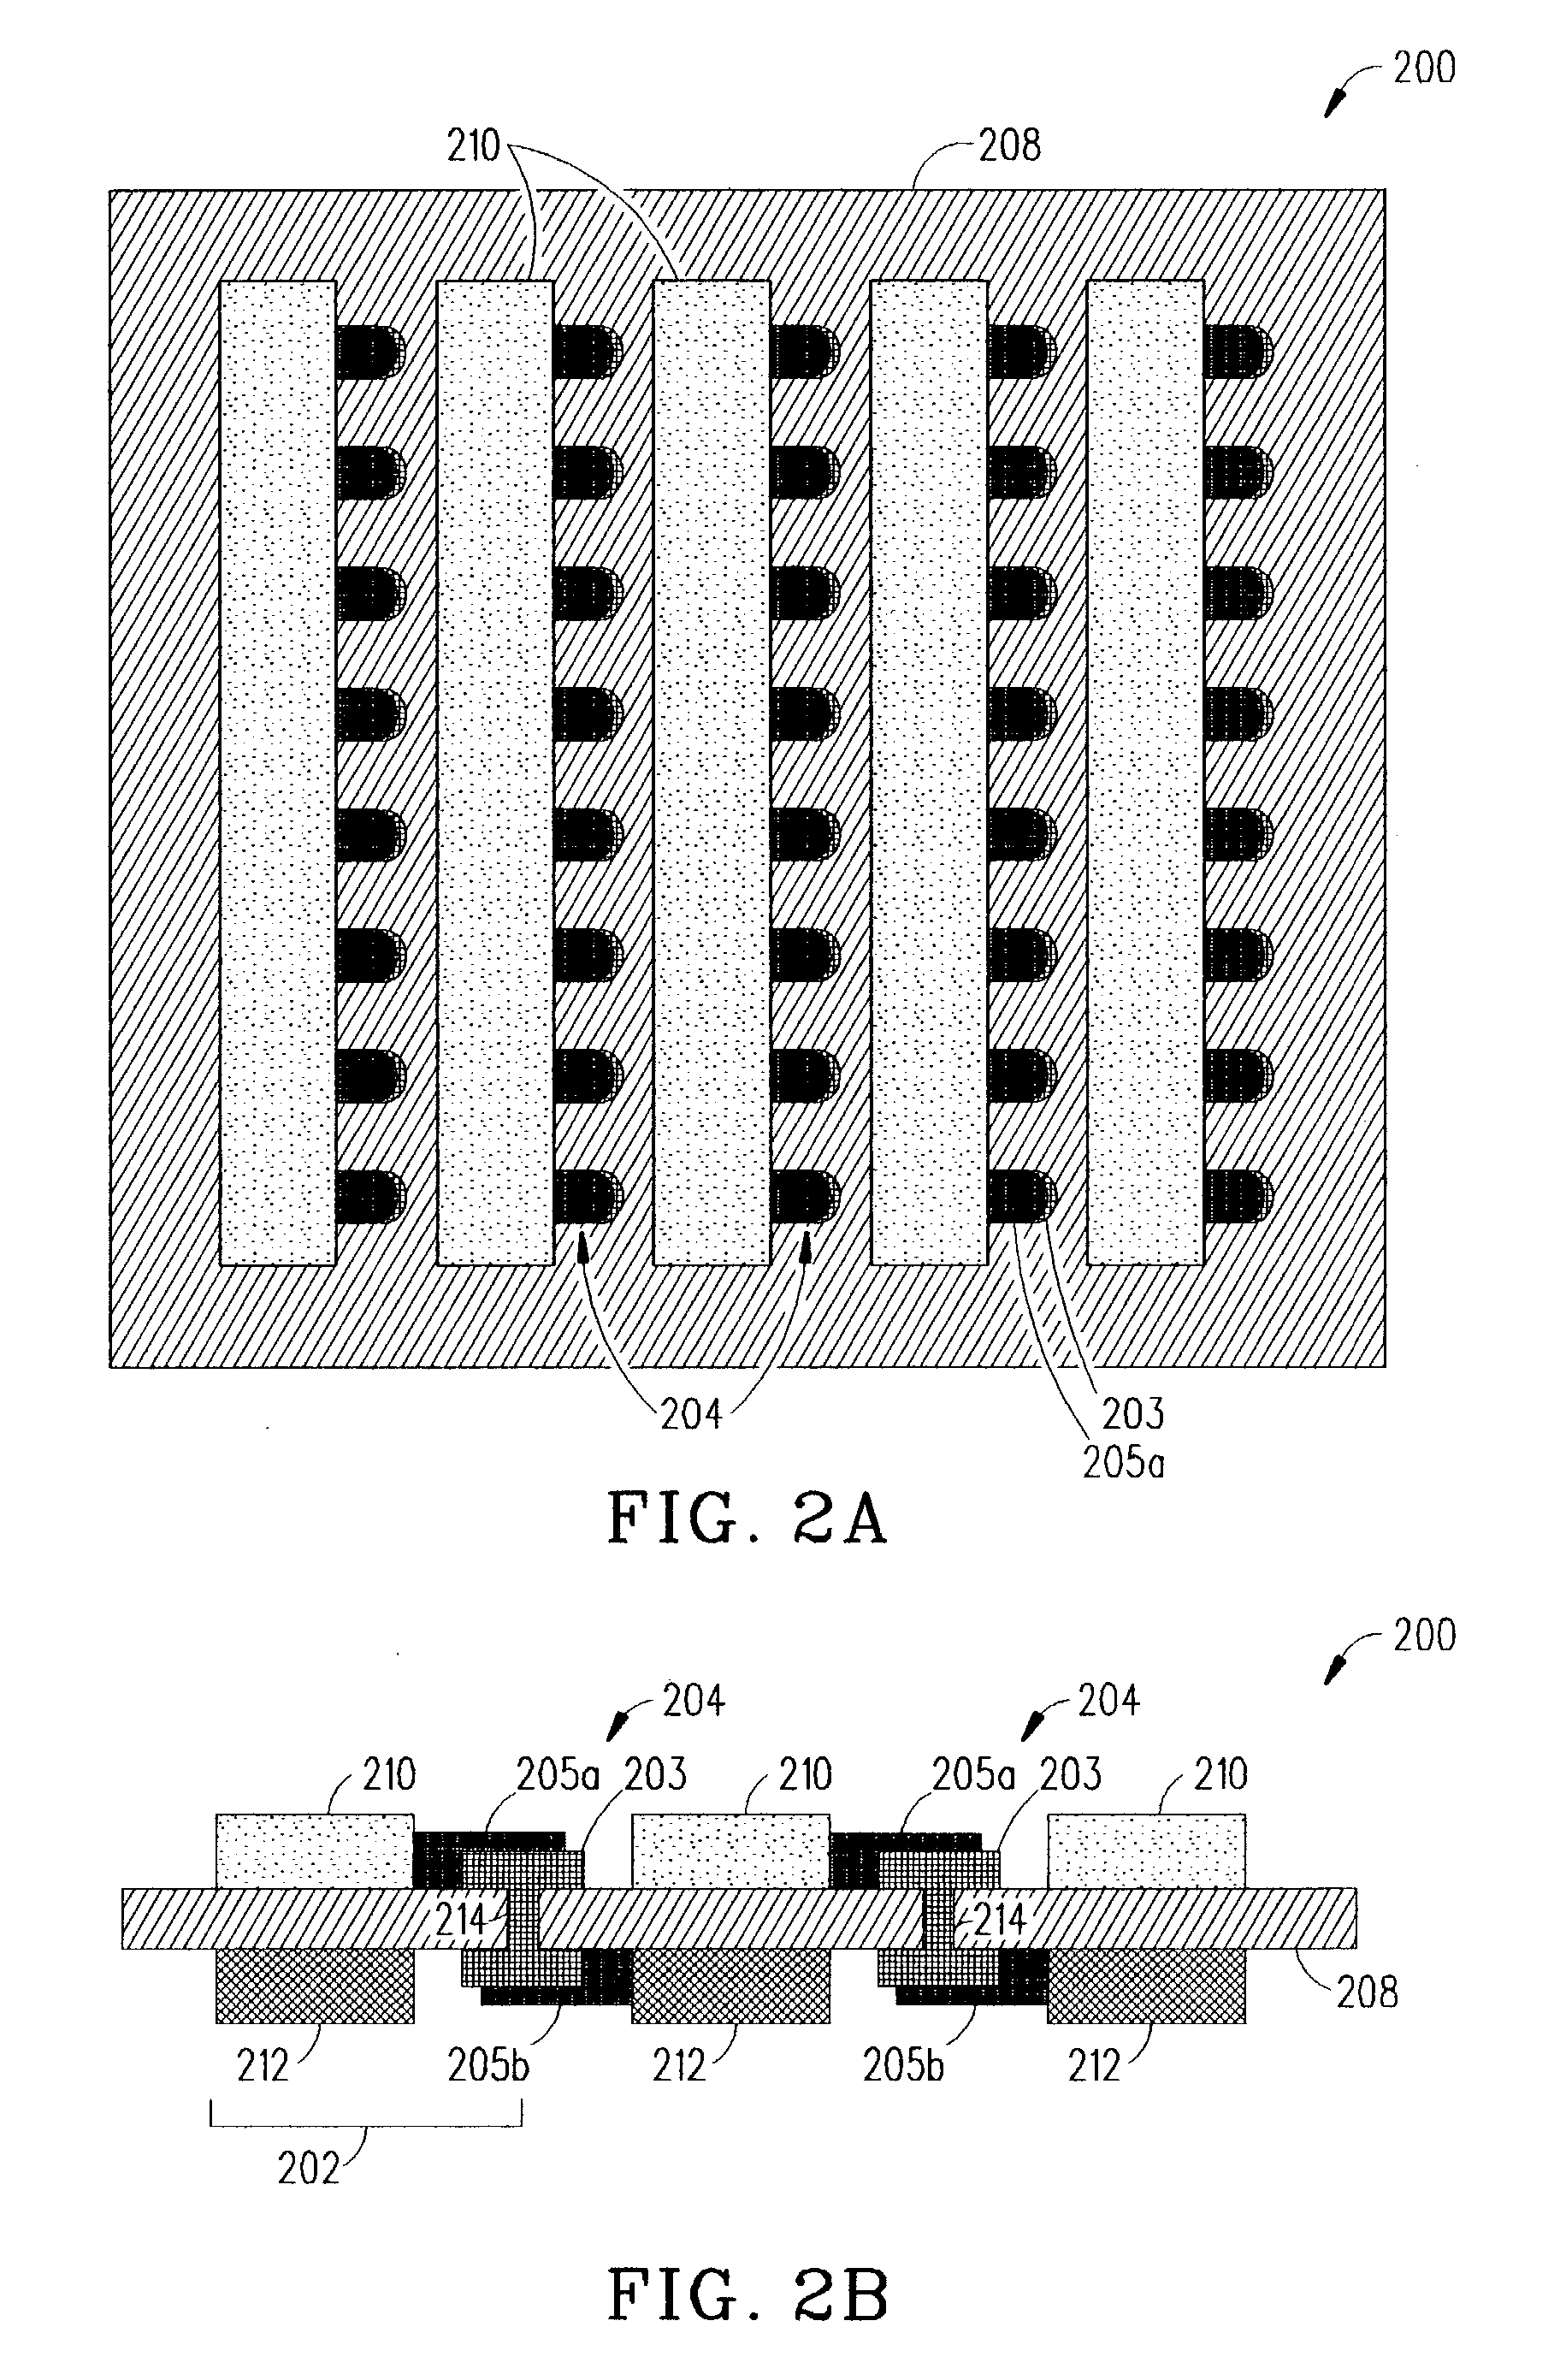 Fuel cells with enhanced via fill compositions and/or enhanced via fill geometries